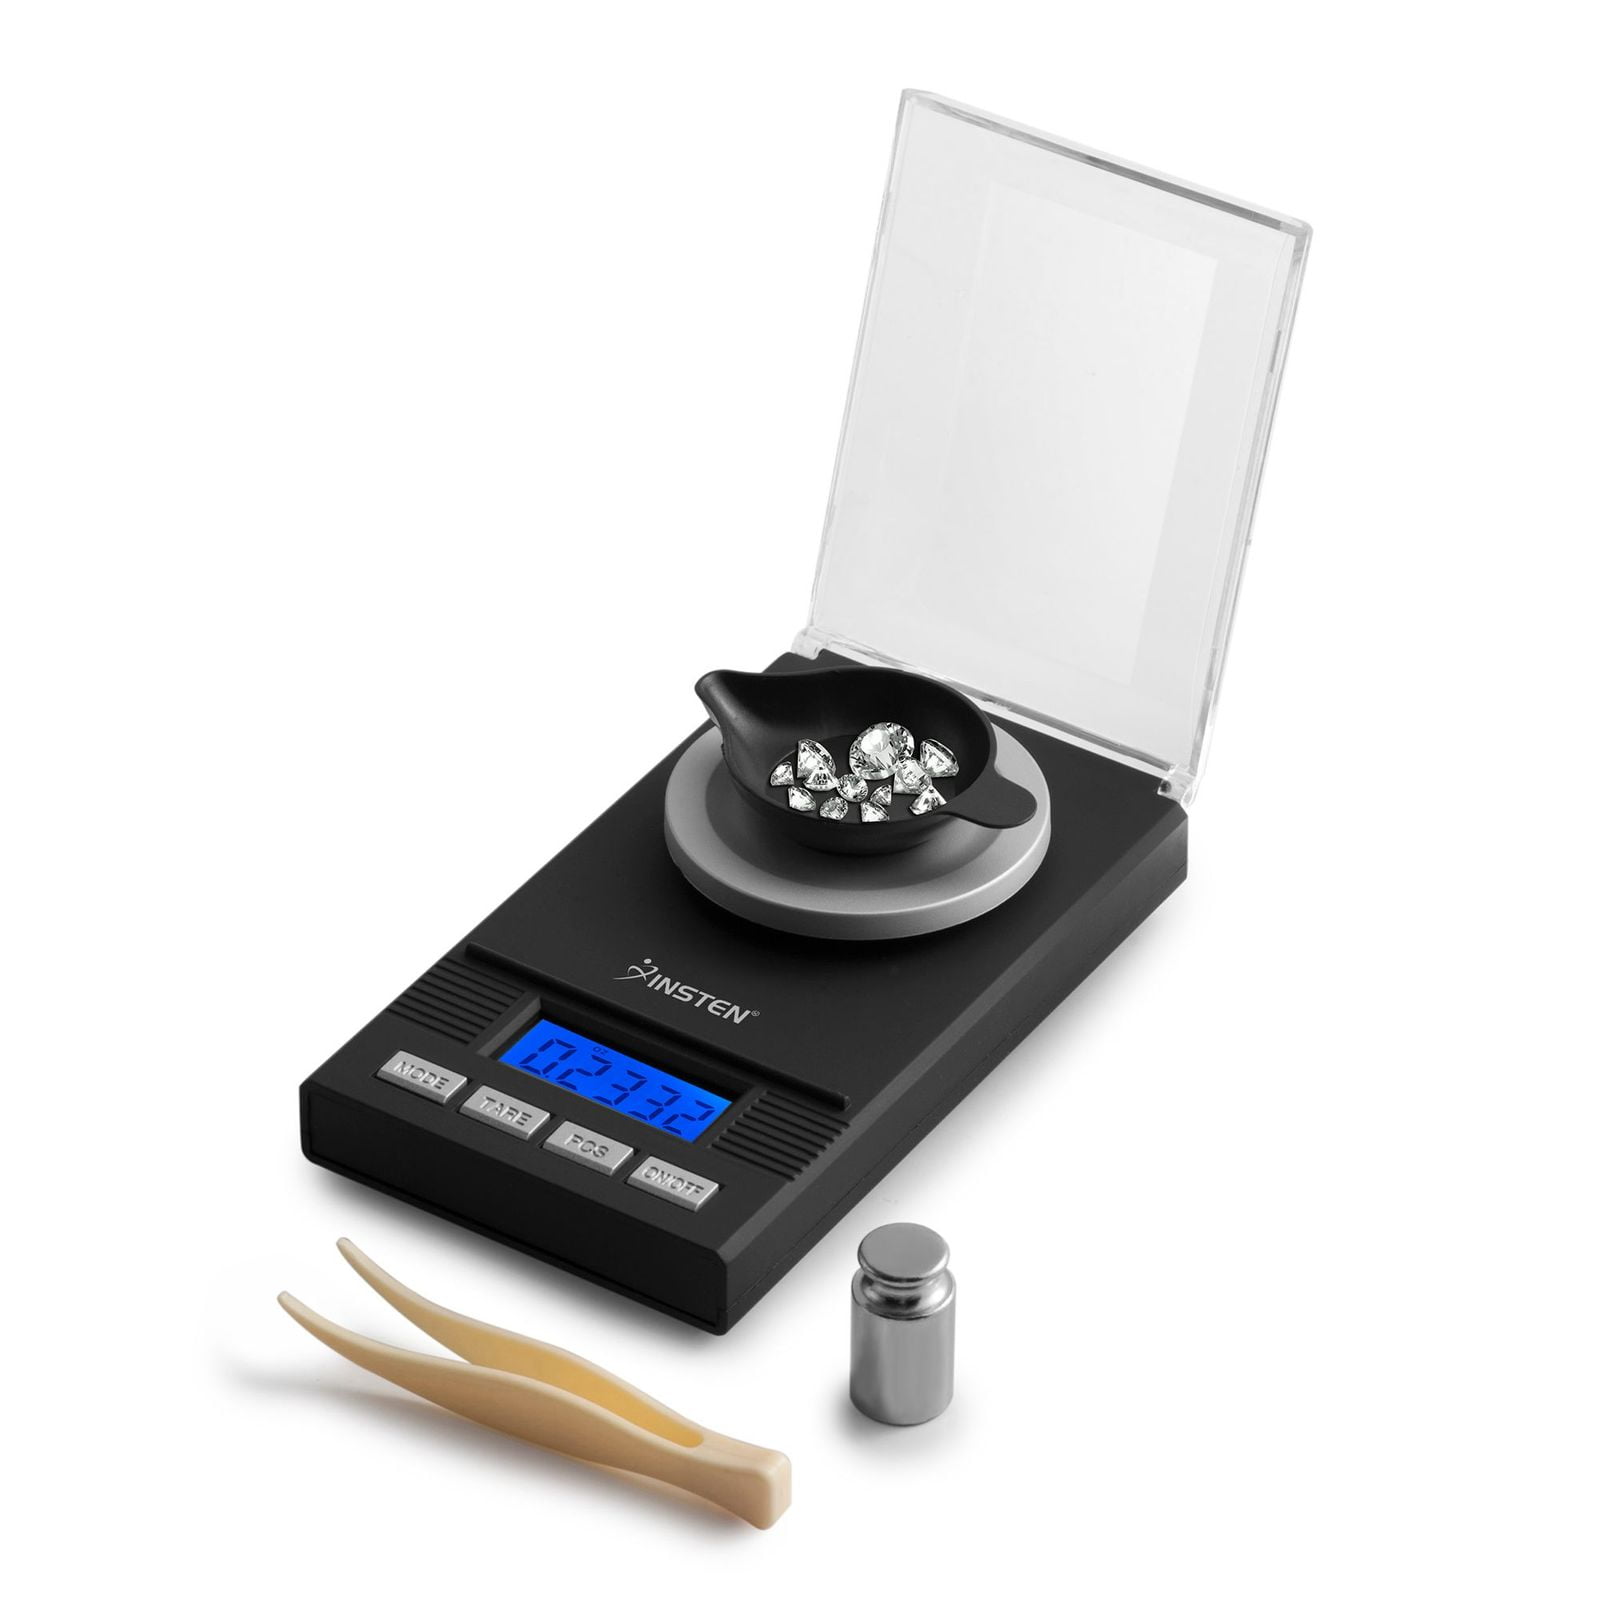 200g x 0.01g Digital Jewelry Scale Gold Herb Balance Weight Gram LCD Hight Accur 